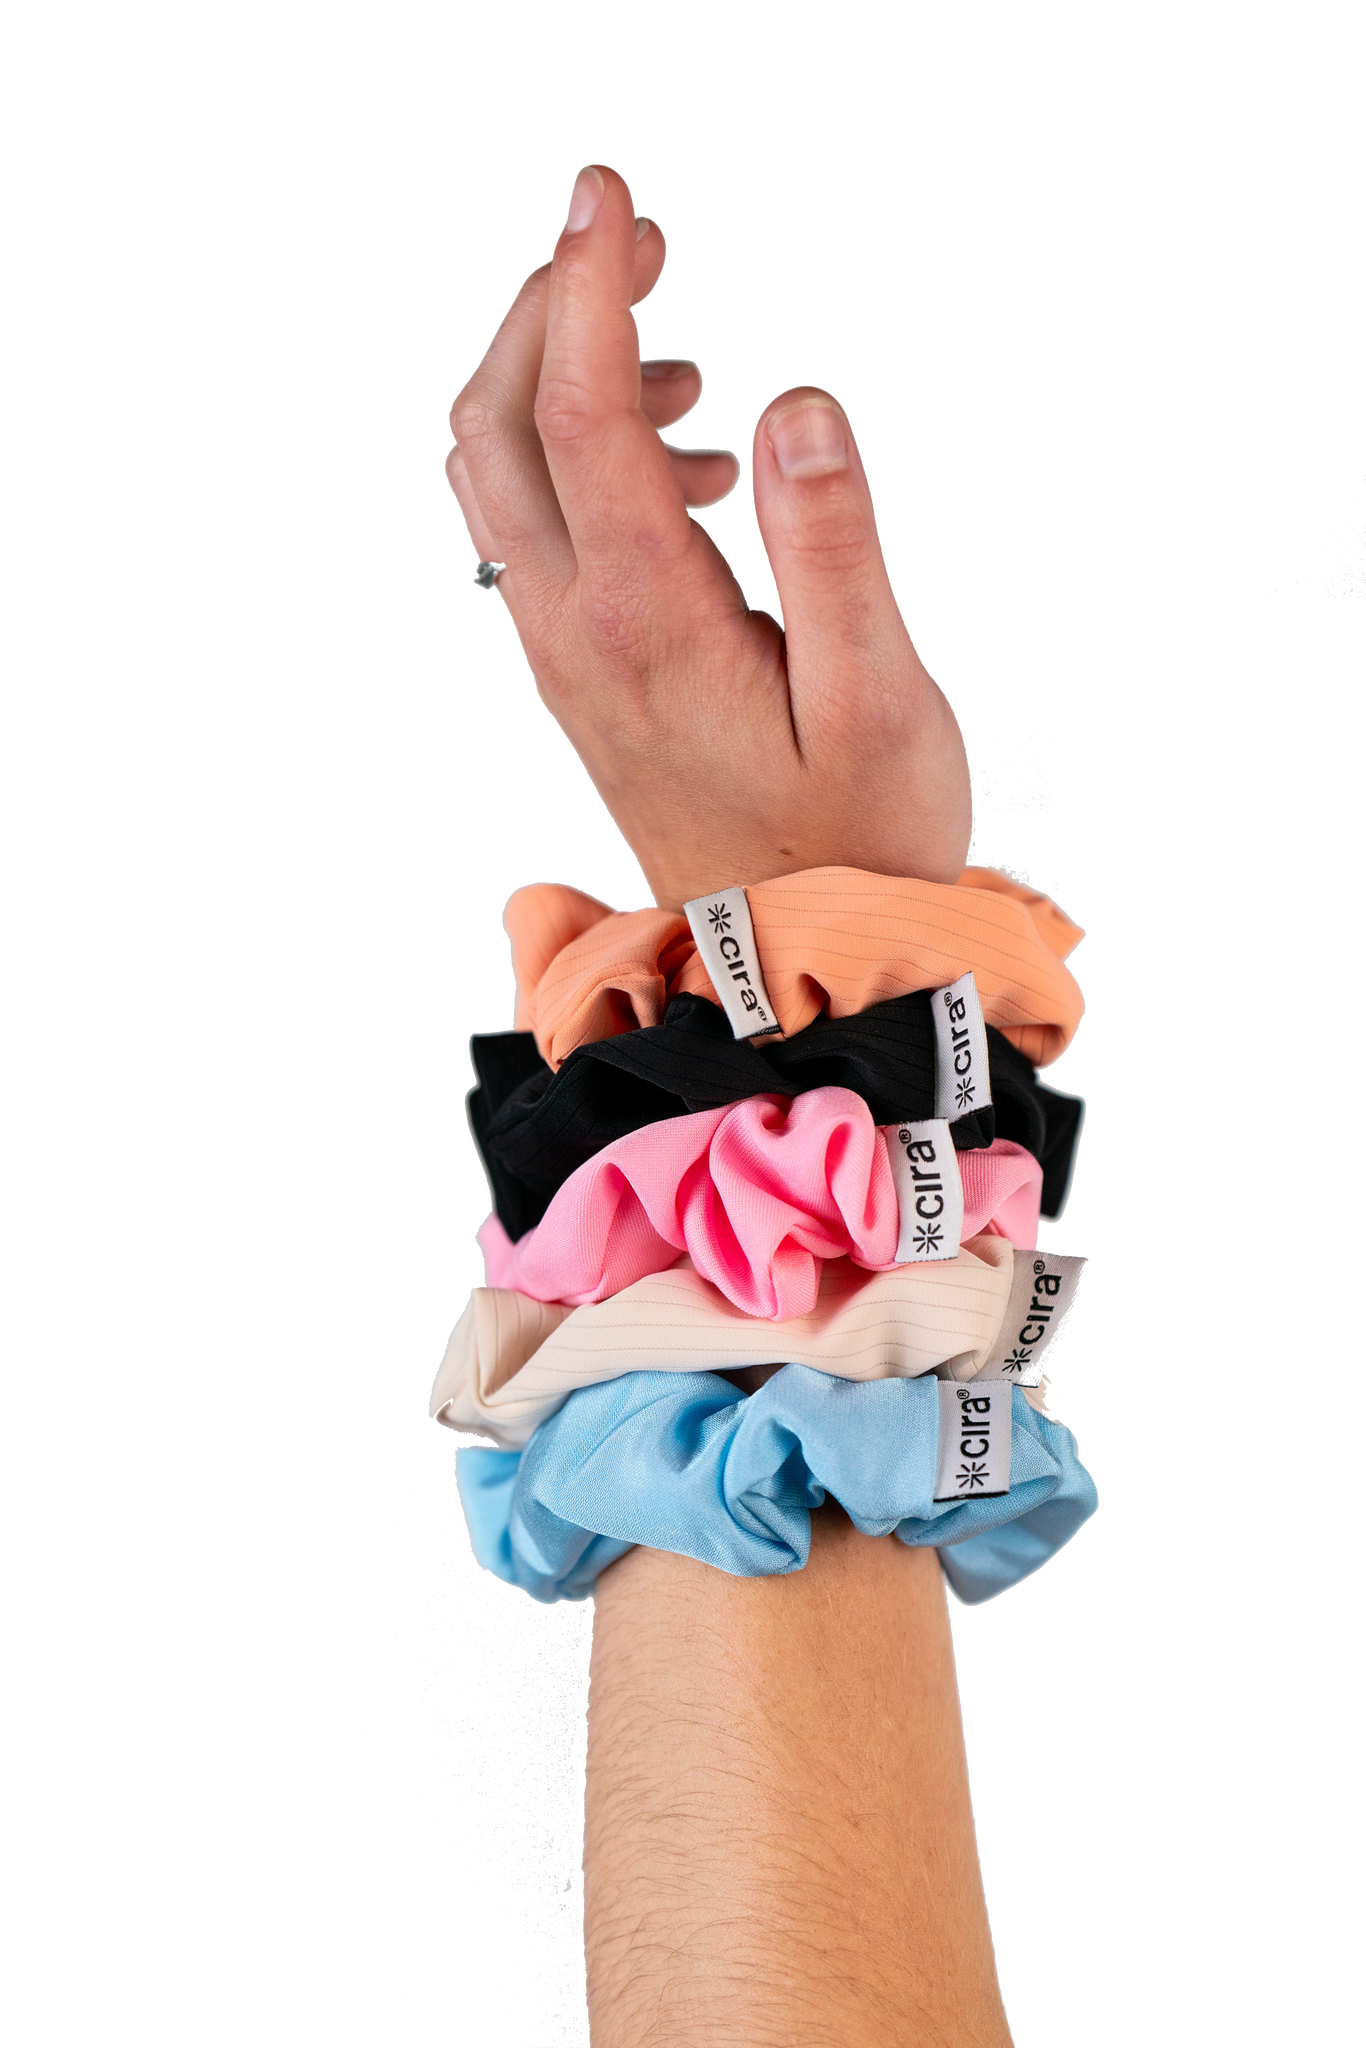 A woman's wrist with the complete collection of Cira Nutrition Scrunchies in Orange, Black, Pink, Beige, and Blue